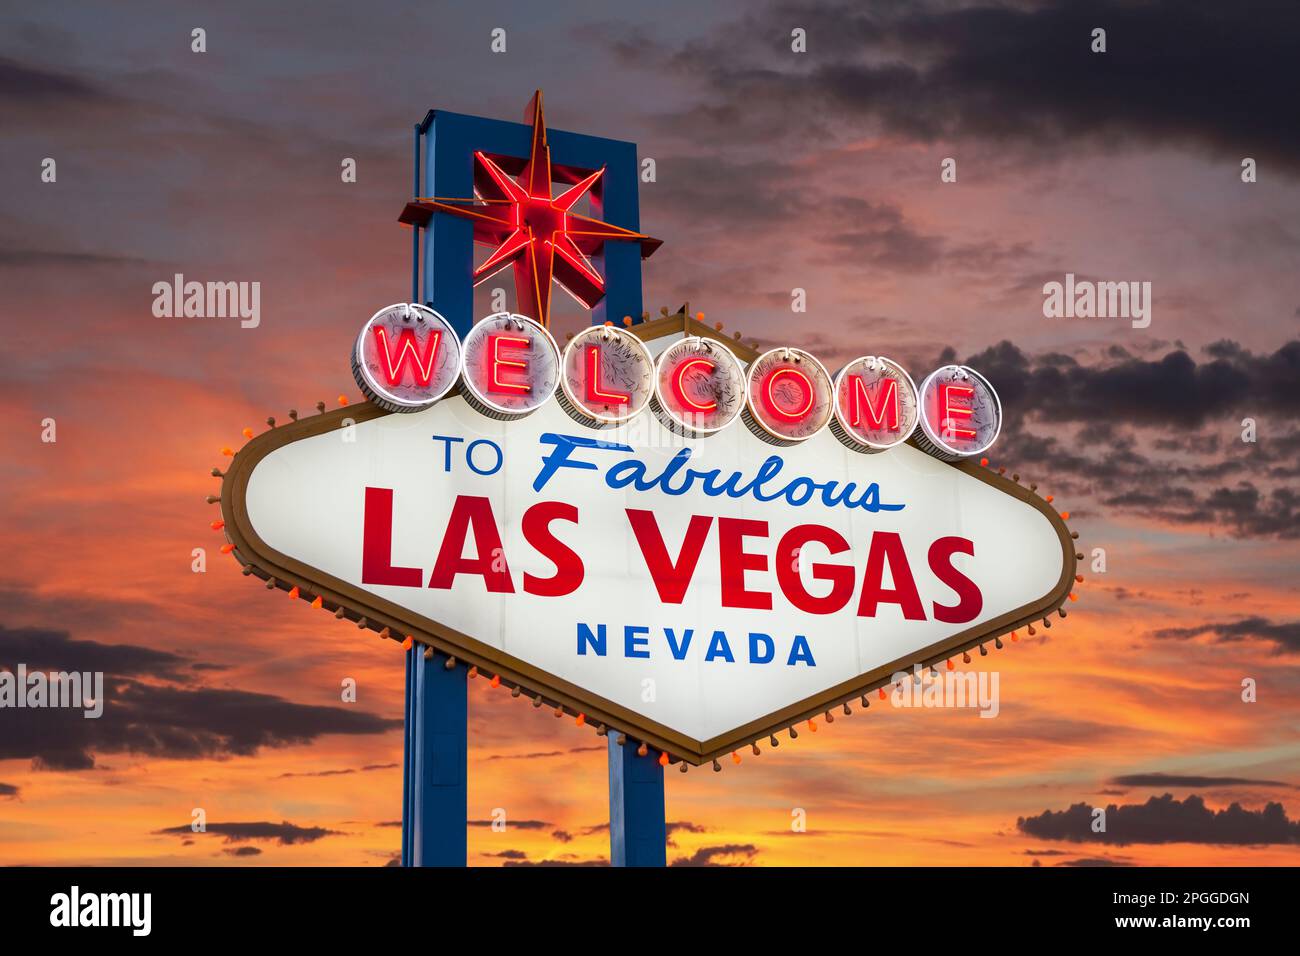 Sunset view of the famous Welcome to Fabulous Las Vegas sign. Stock Photo